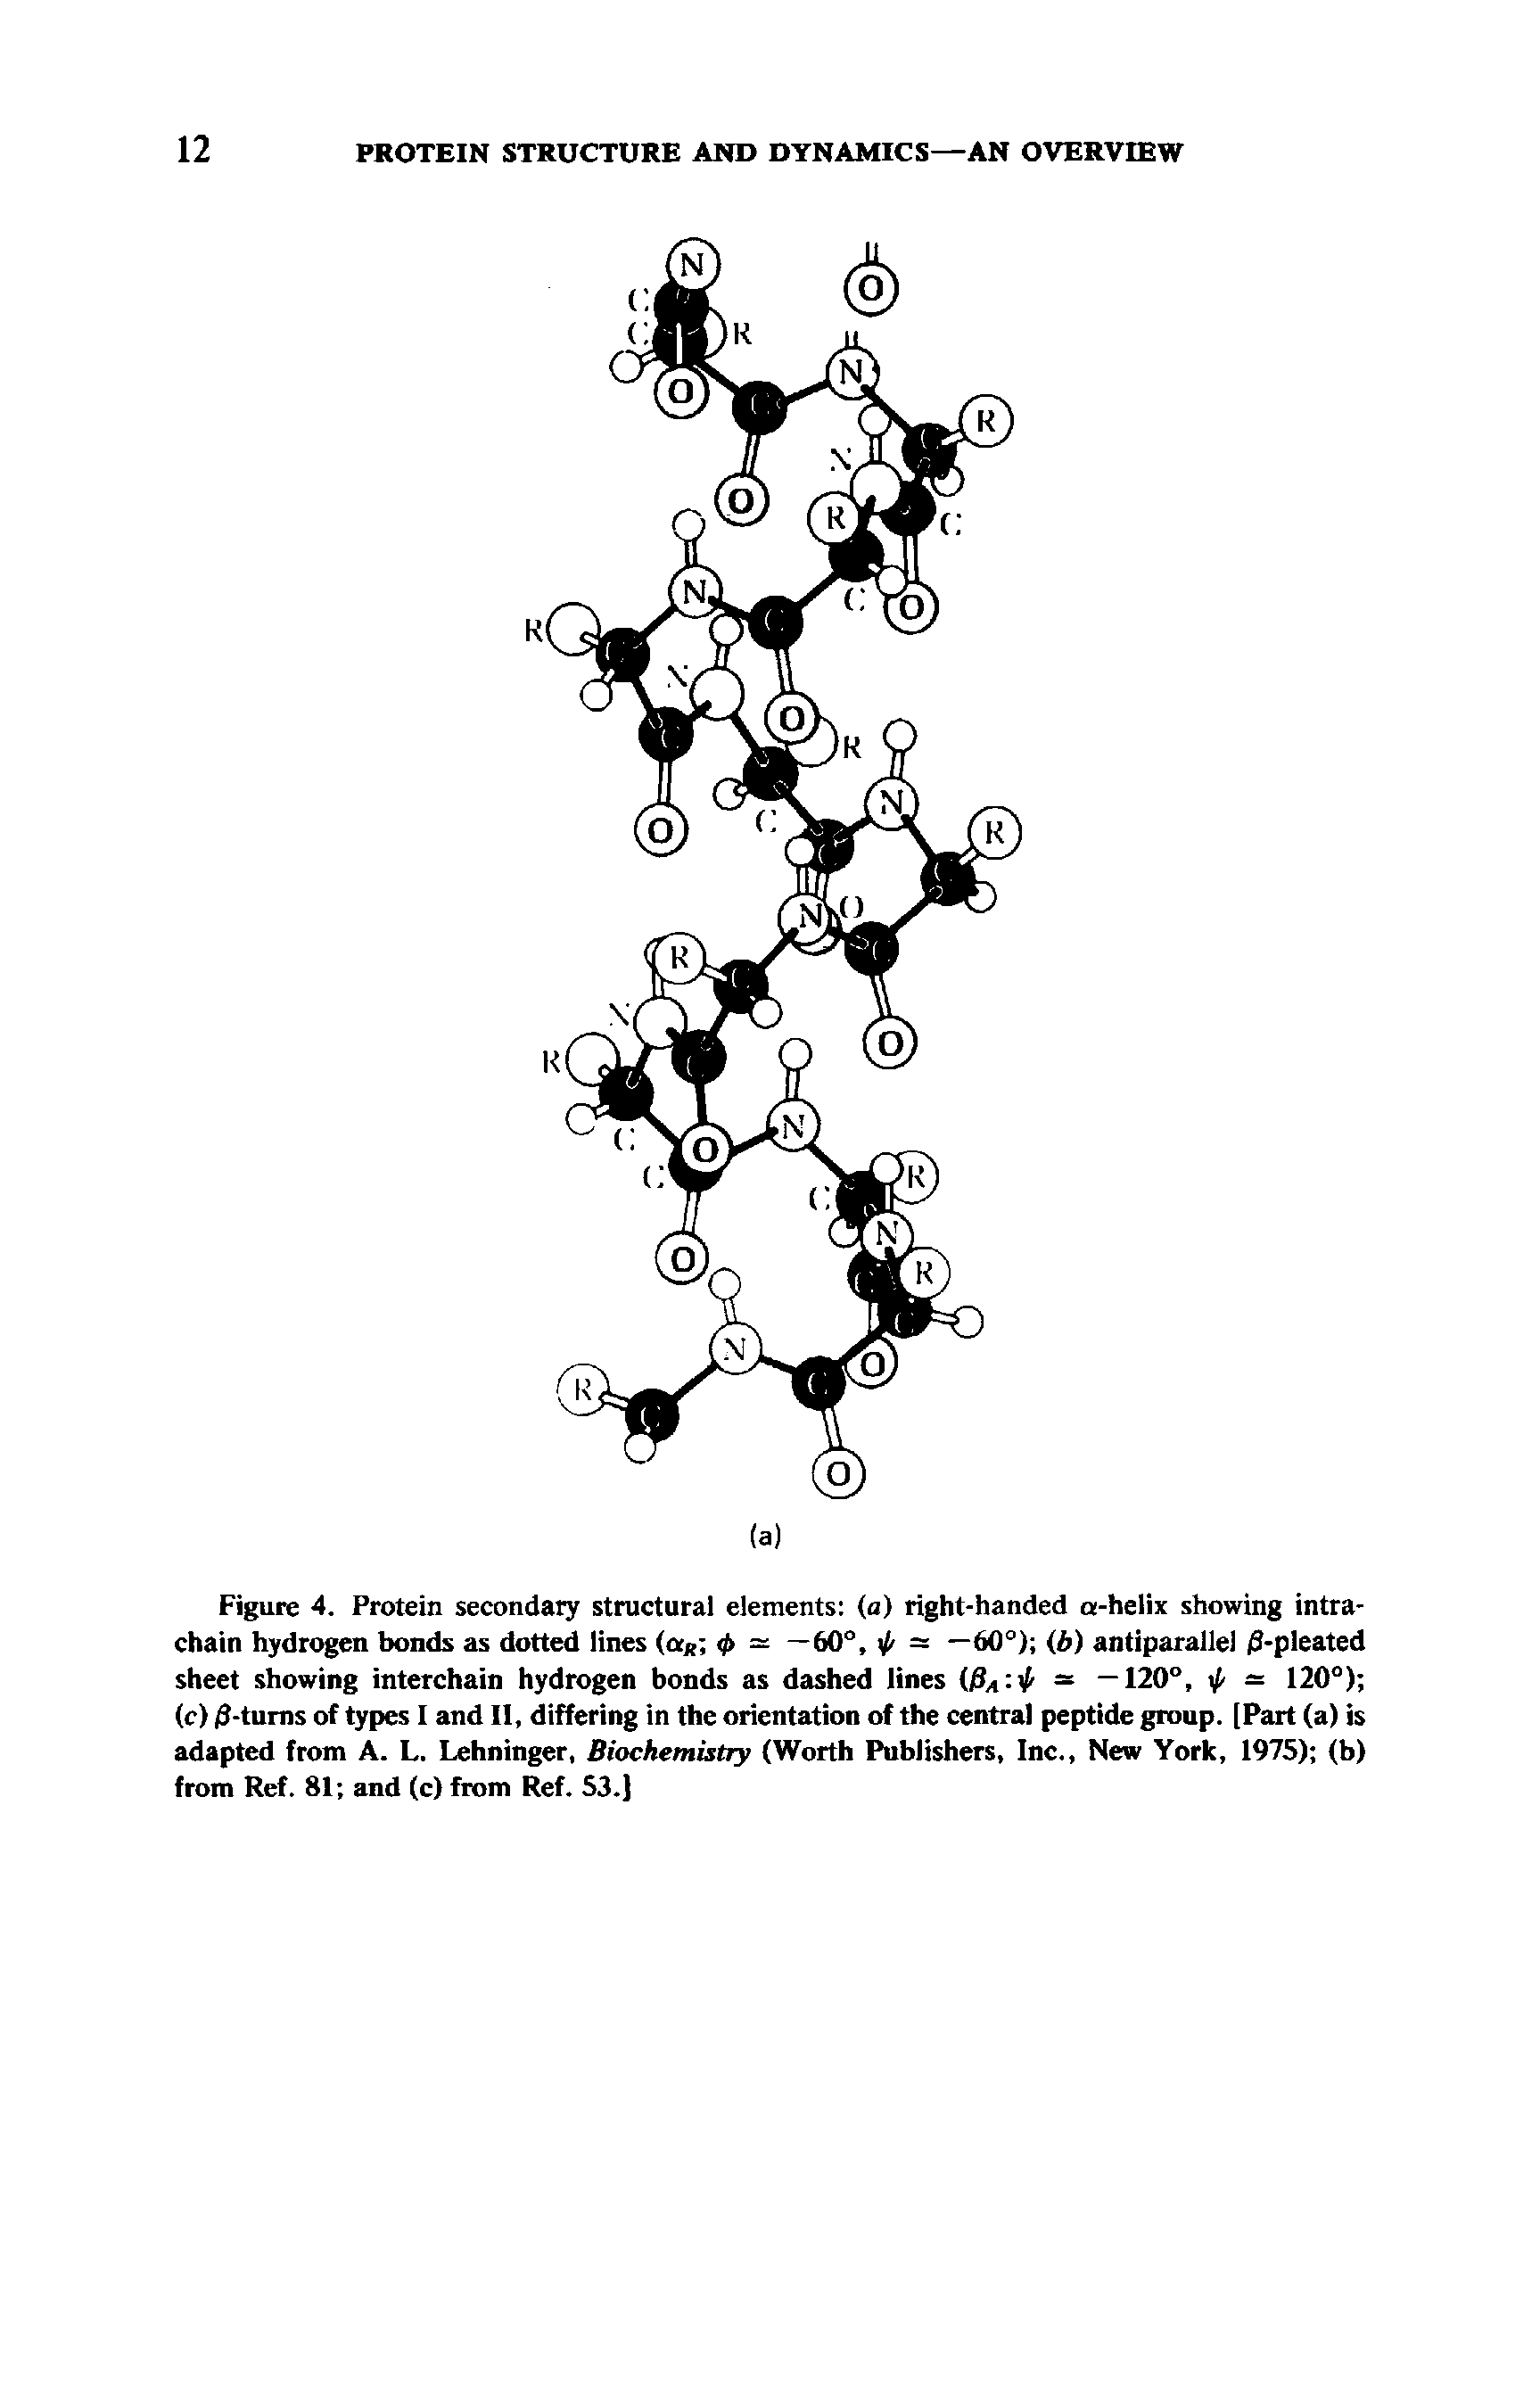 Figure 4. Protein secondary structural elements (a) right-handed a-helix showing intrachain hydrogen bonds as dotted lines (crR 0 = —60°, 0 = —60°) (b) antiparallel /S-pleated sheet showing interchain hydrogen bonds as dashed lines WA 0 = —120°, 0 = 120°) (c) /3-turns of types I and II, differing in the orientation of the central peptide group. [Part (a) is adapted from A. L. Lehninger, Biochemistry (Worth Publishers, Inc., New York, 1975) (b) from Ref. 81 and (c) from Ref. 53.J...